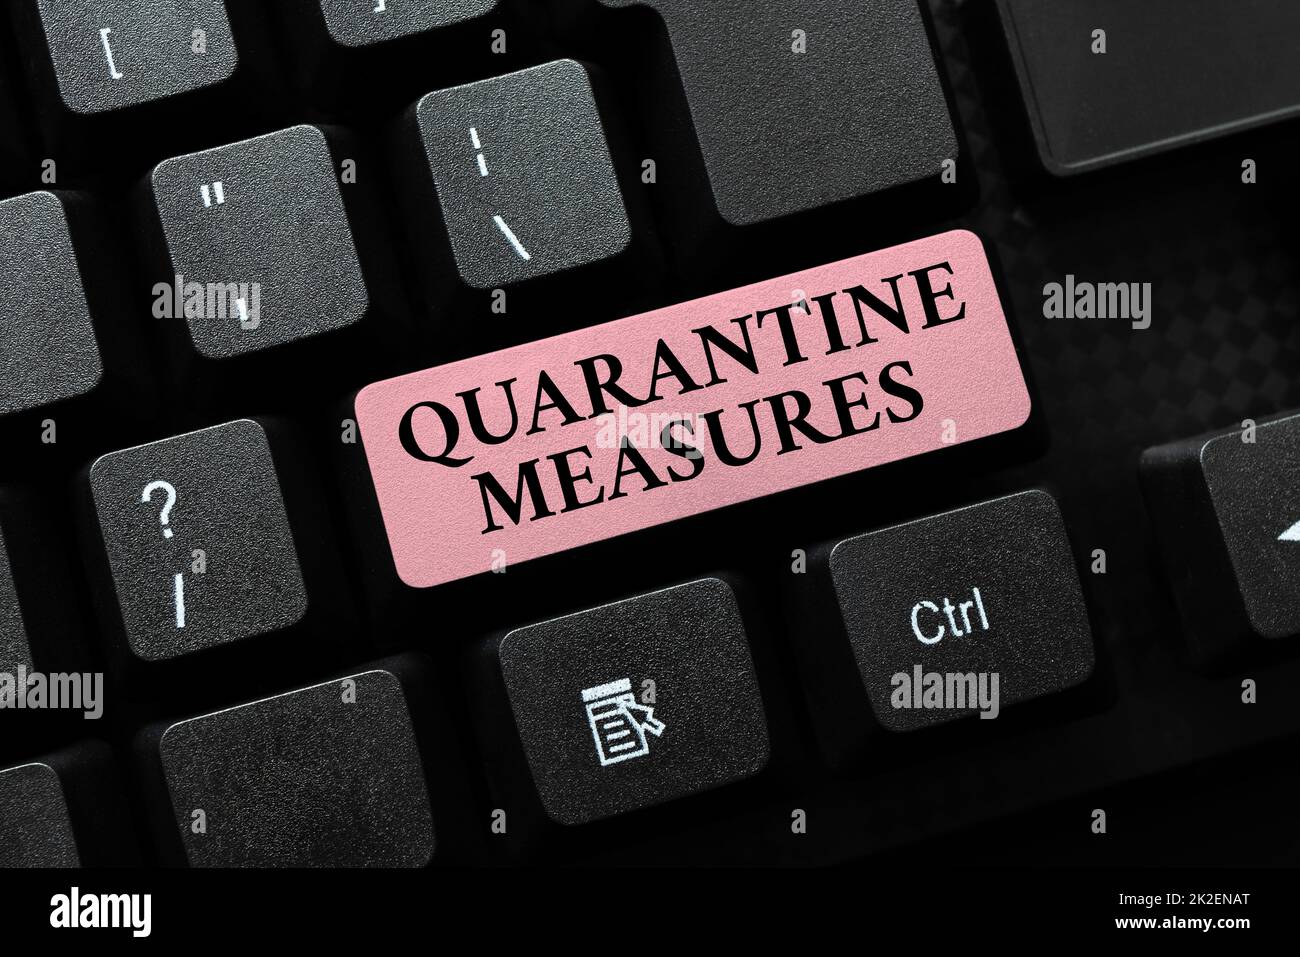 Text caption presenting Quarantine Measures. Internet Concept safety procedure to follow preventing the transmission of disease Editing And Retyping Report Spelling Errors, Typing Online Shop Inventory Stock Photo